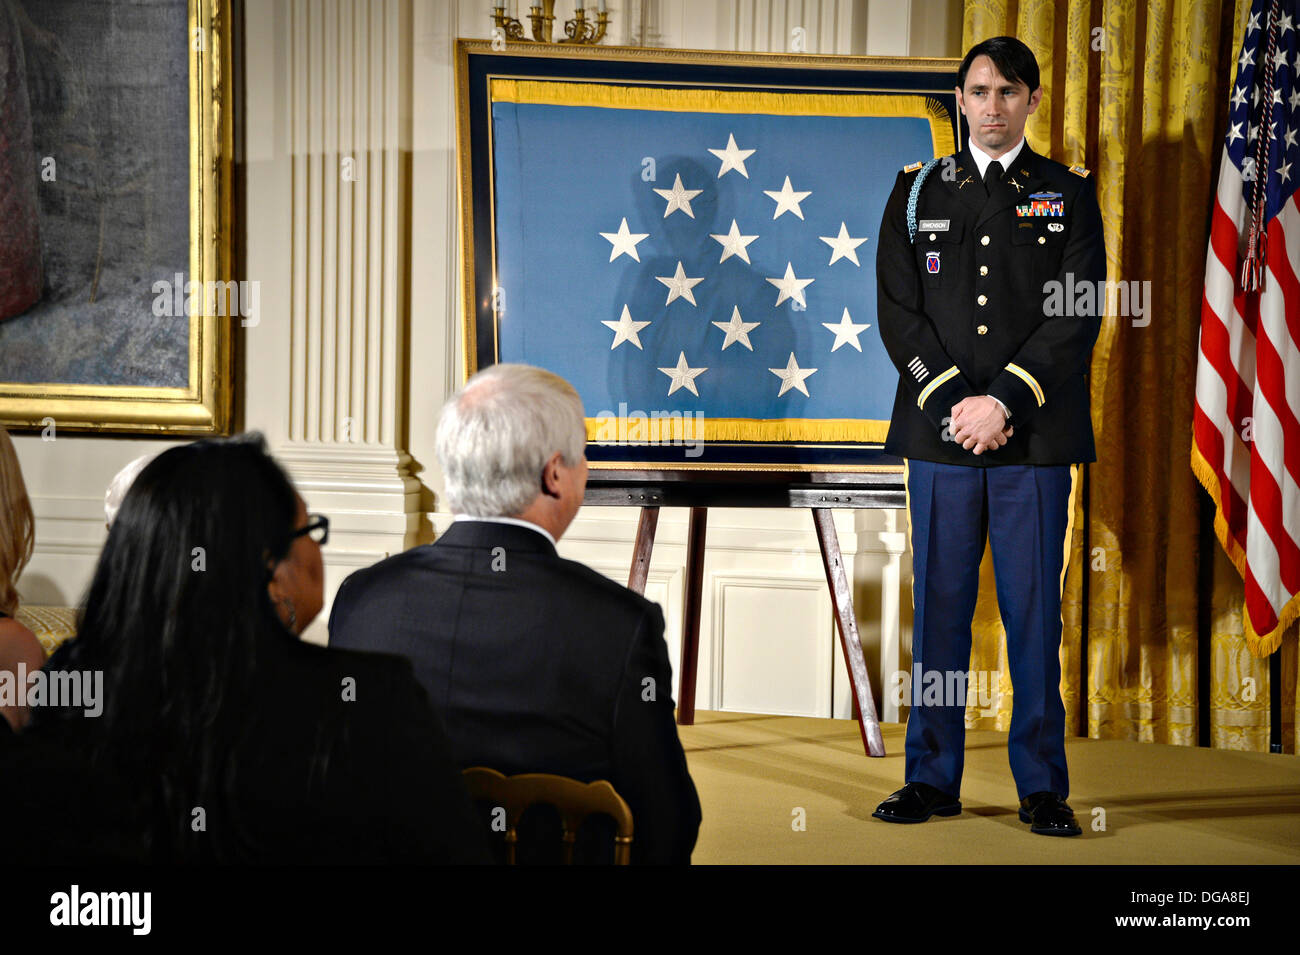 US Army Capt. William D. Swenson during the Medal of Honor ceremony in the East Room of the White House October 15, 2013 in Washington, DC. The Medal of Honor is the nation's highest military honor. Stock Photo